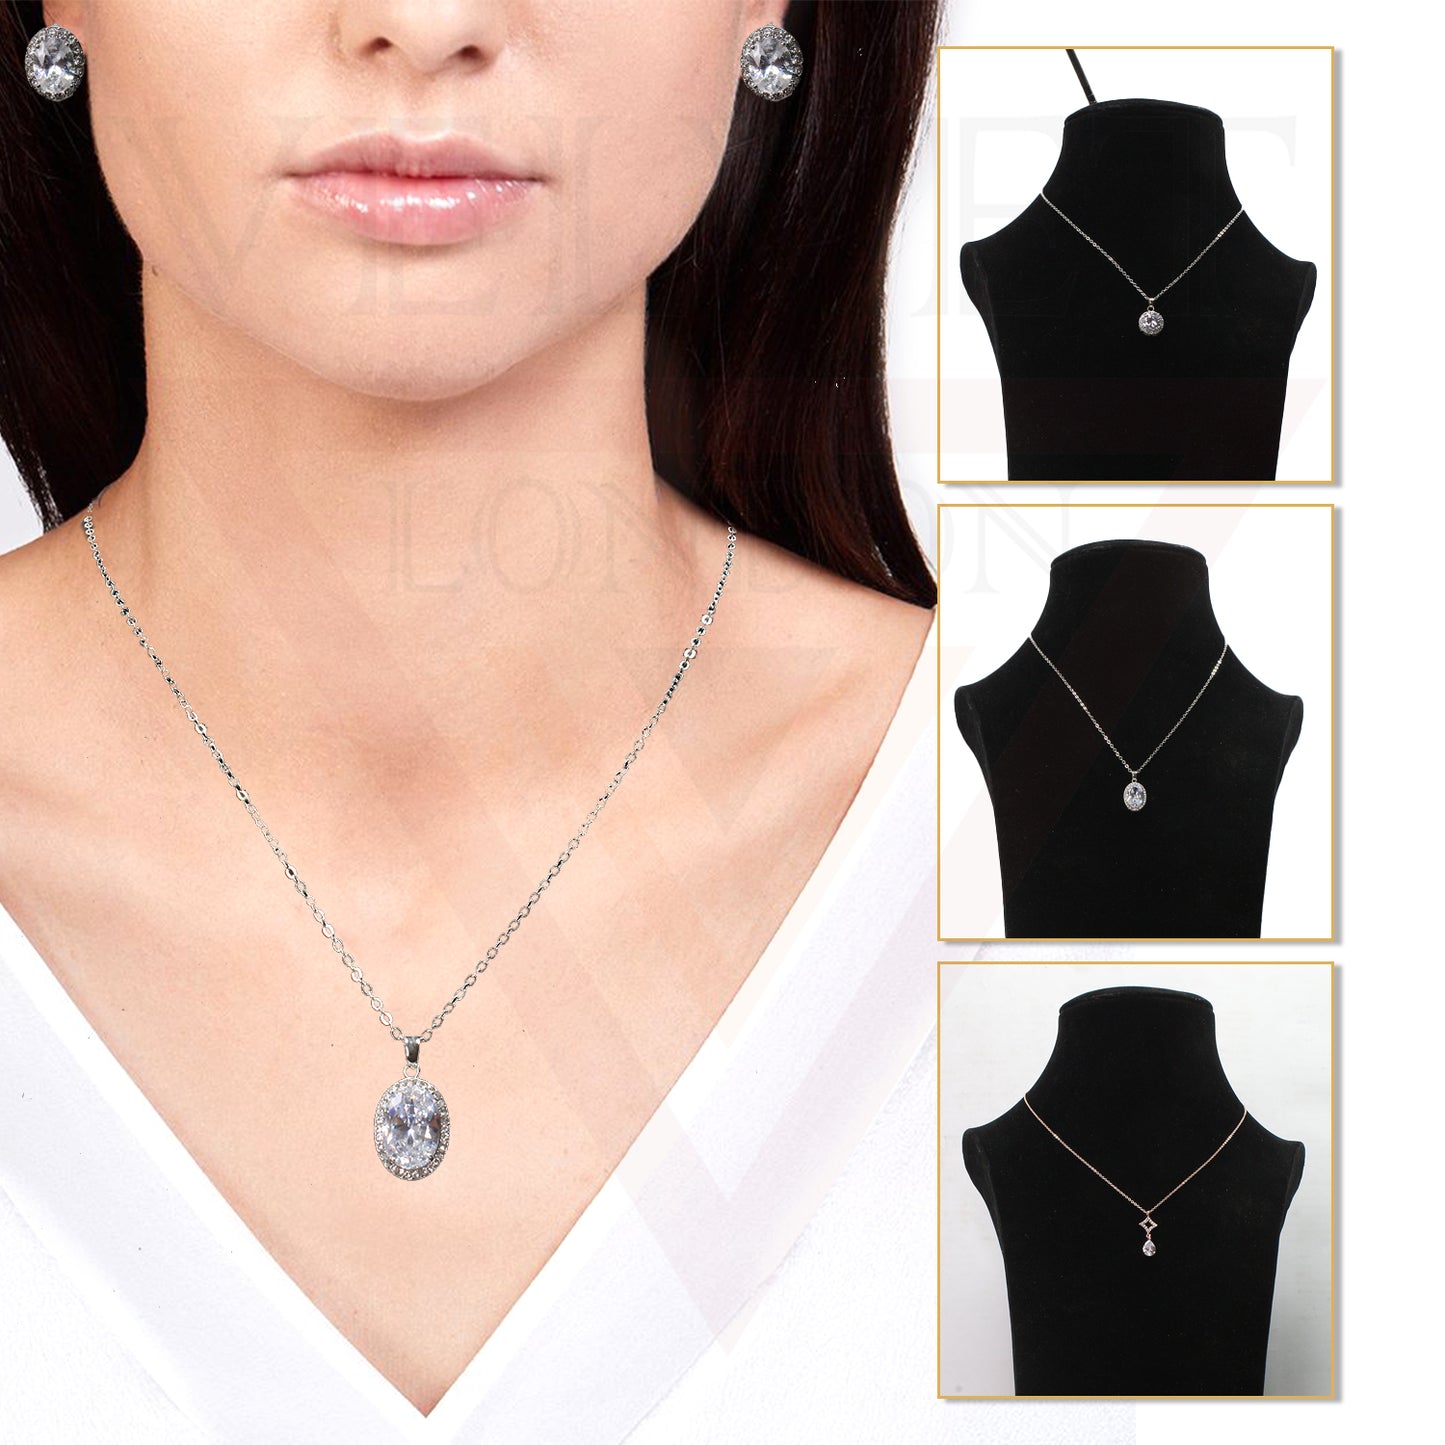 Crystal Pendant Necklace Earrings Set Silver Chain Jewelry Sets